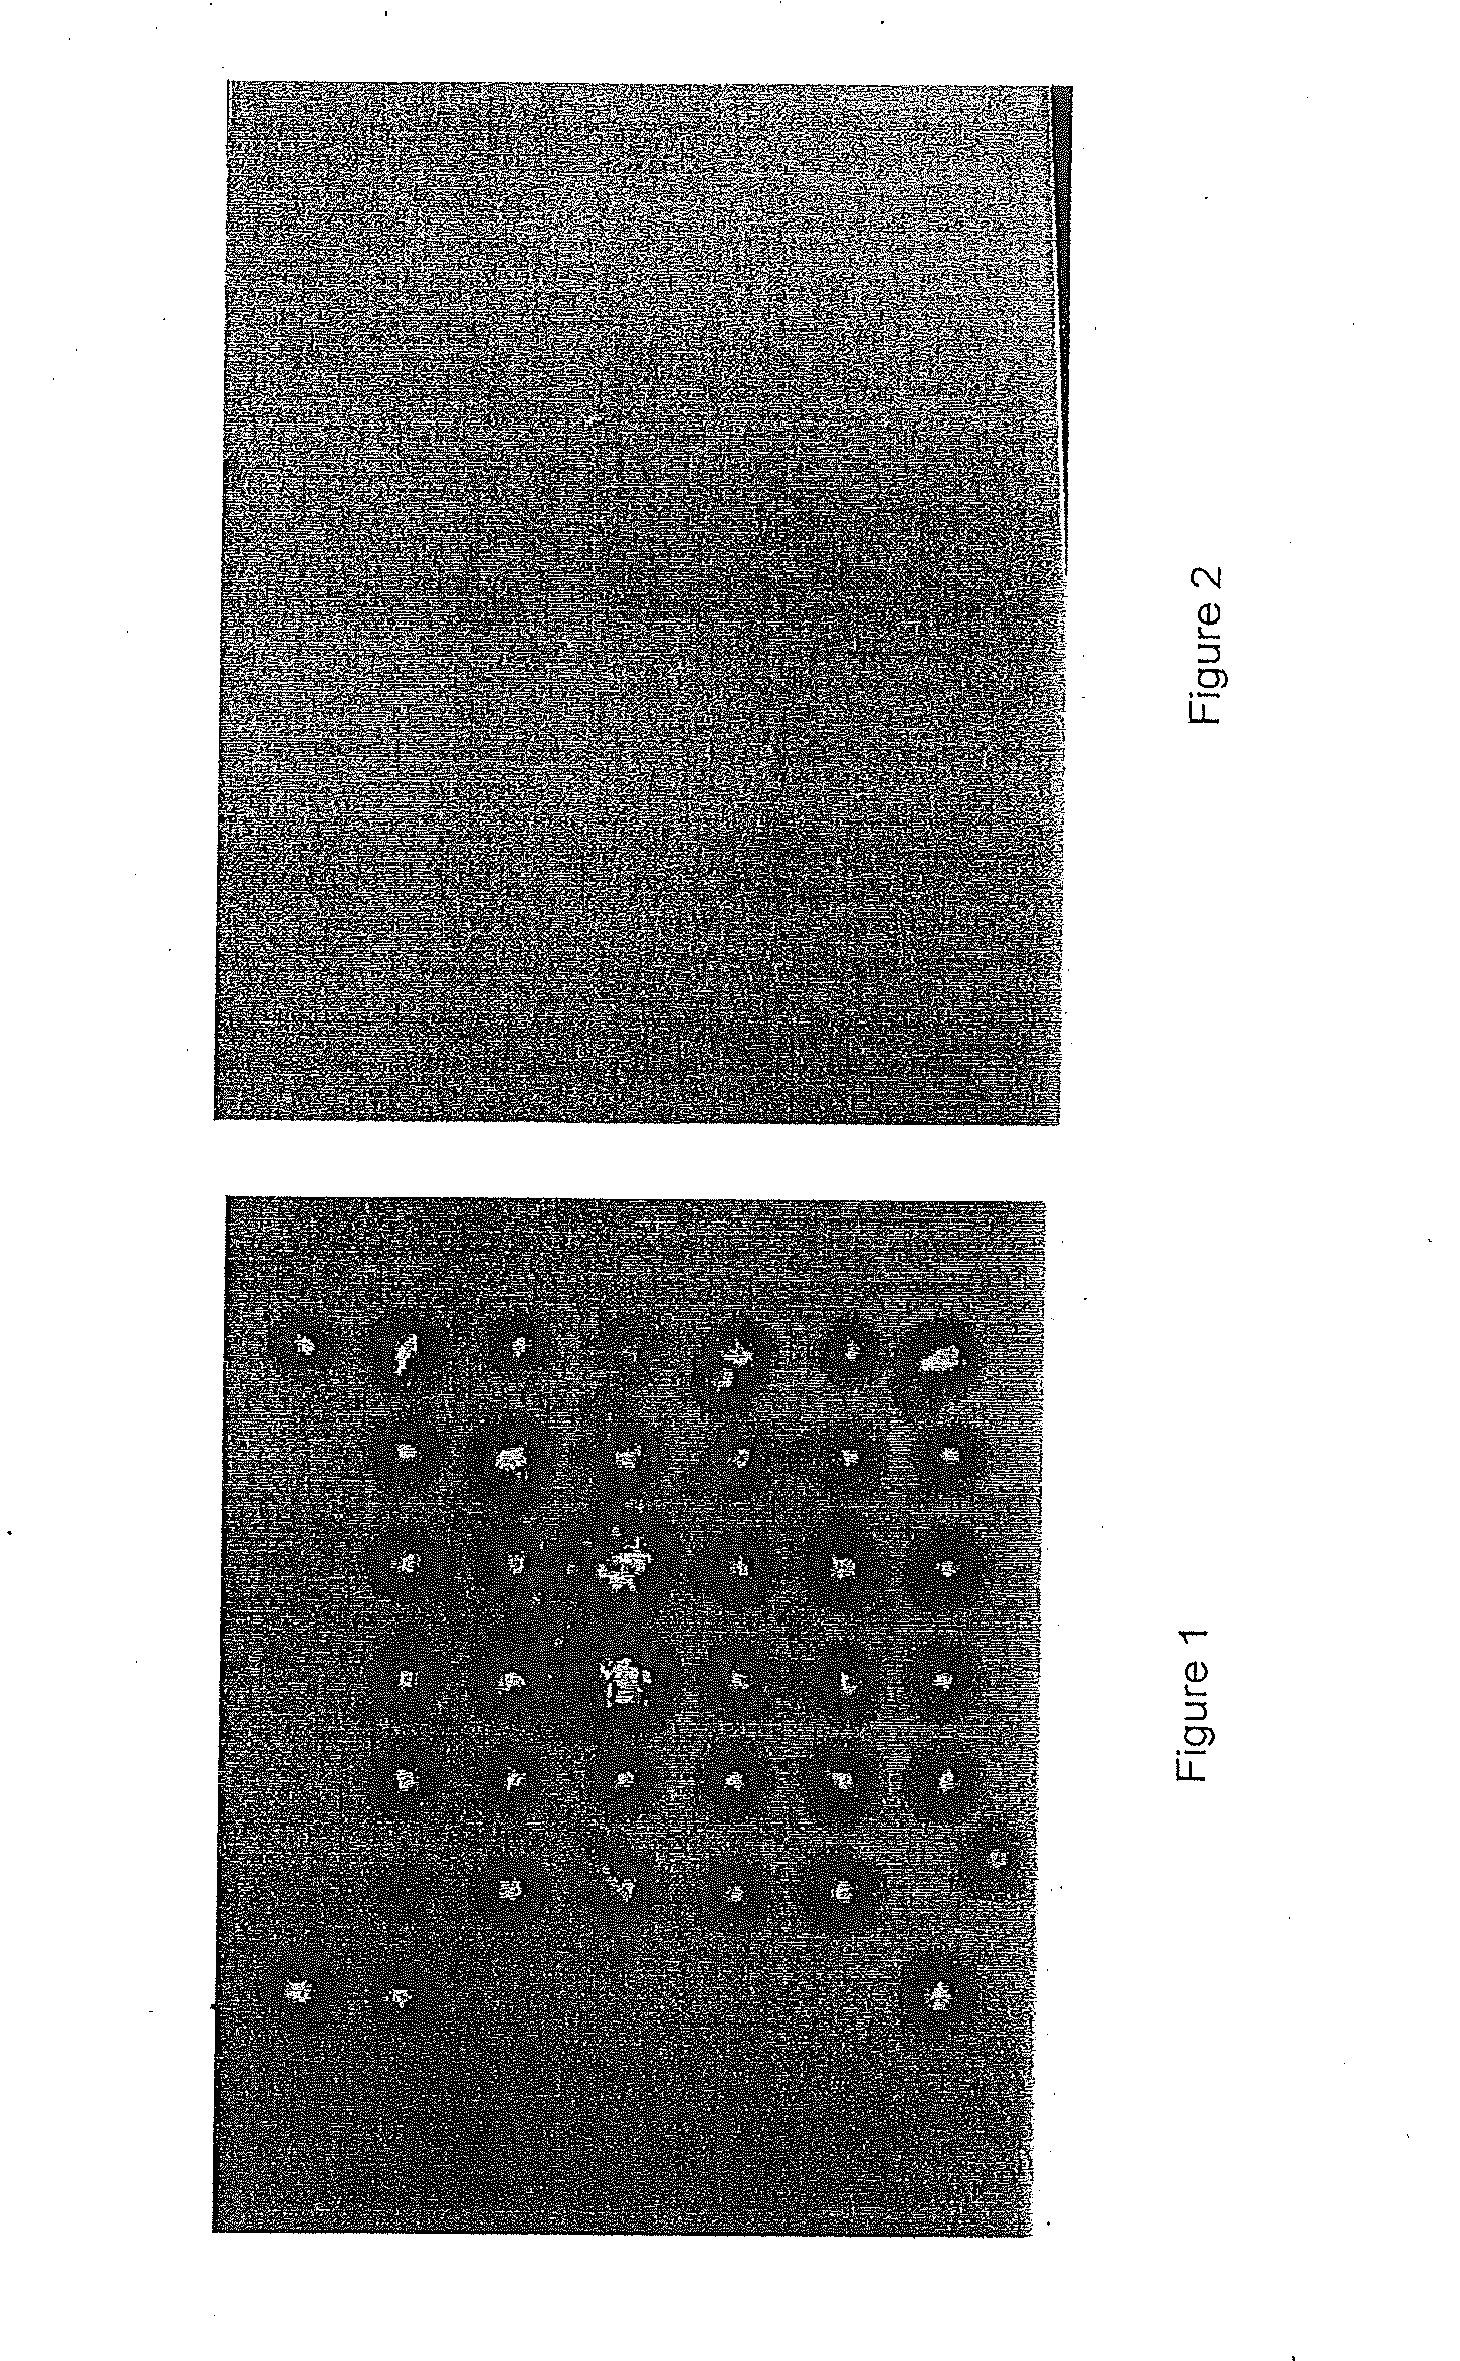 Method for producing molded bodies from sheet steel galvanized on one or both sides